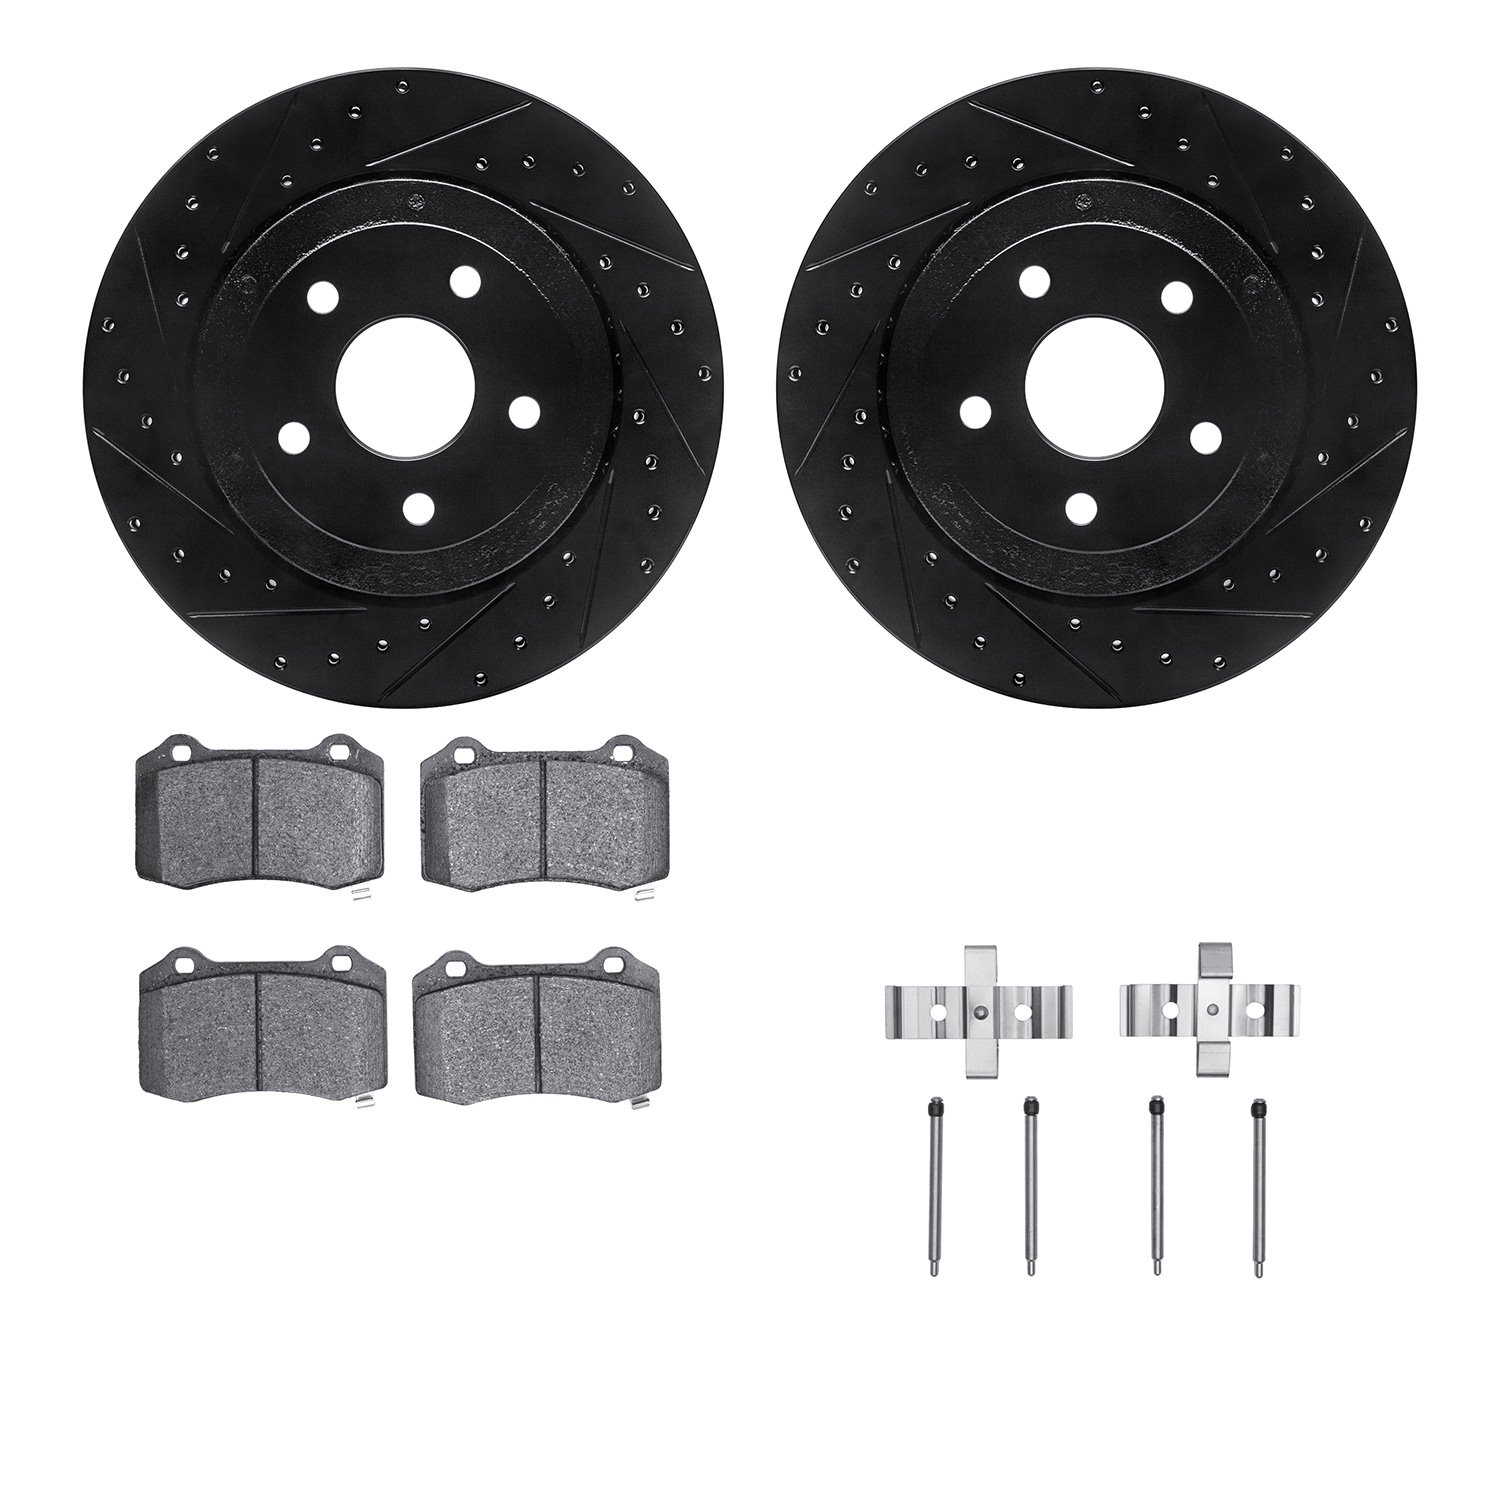 Drilled/Slotted Brake Rotors with Ultimate-Duty Brake Pads Kit